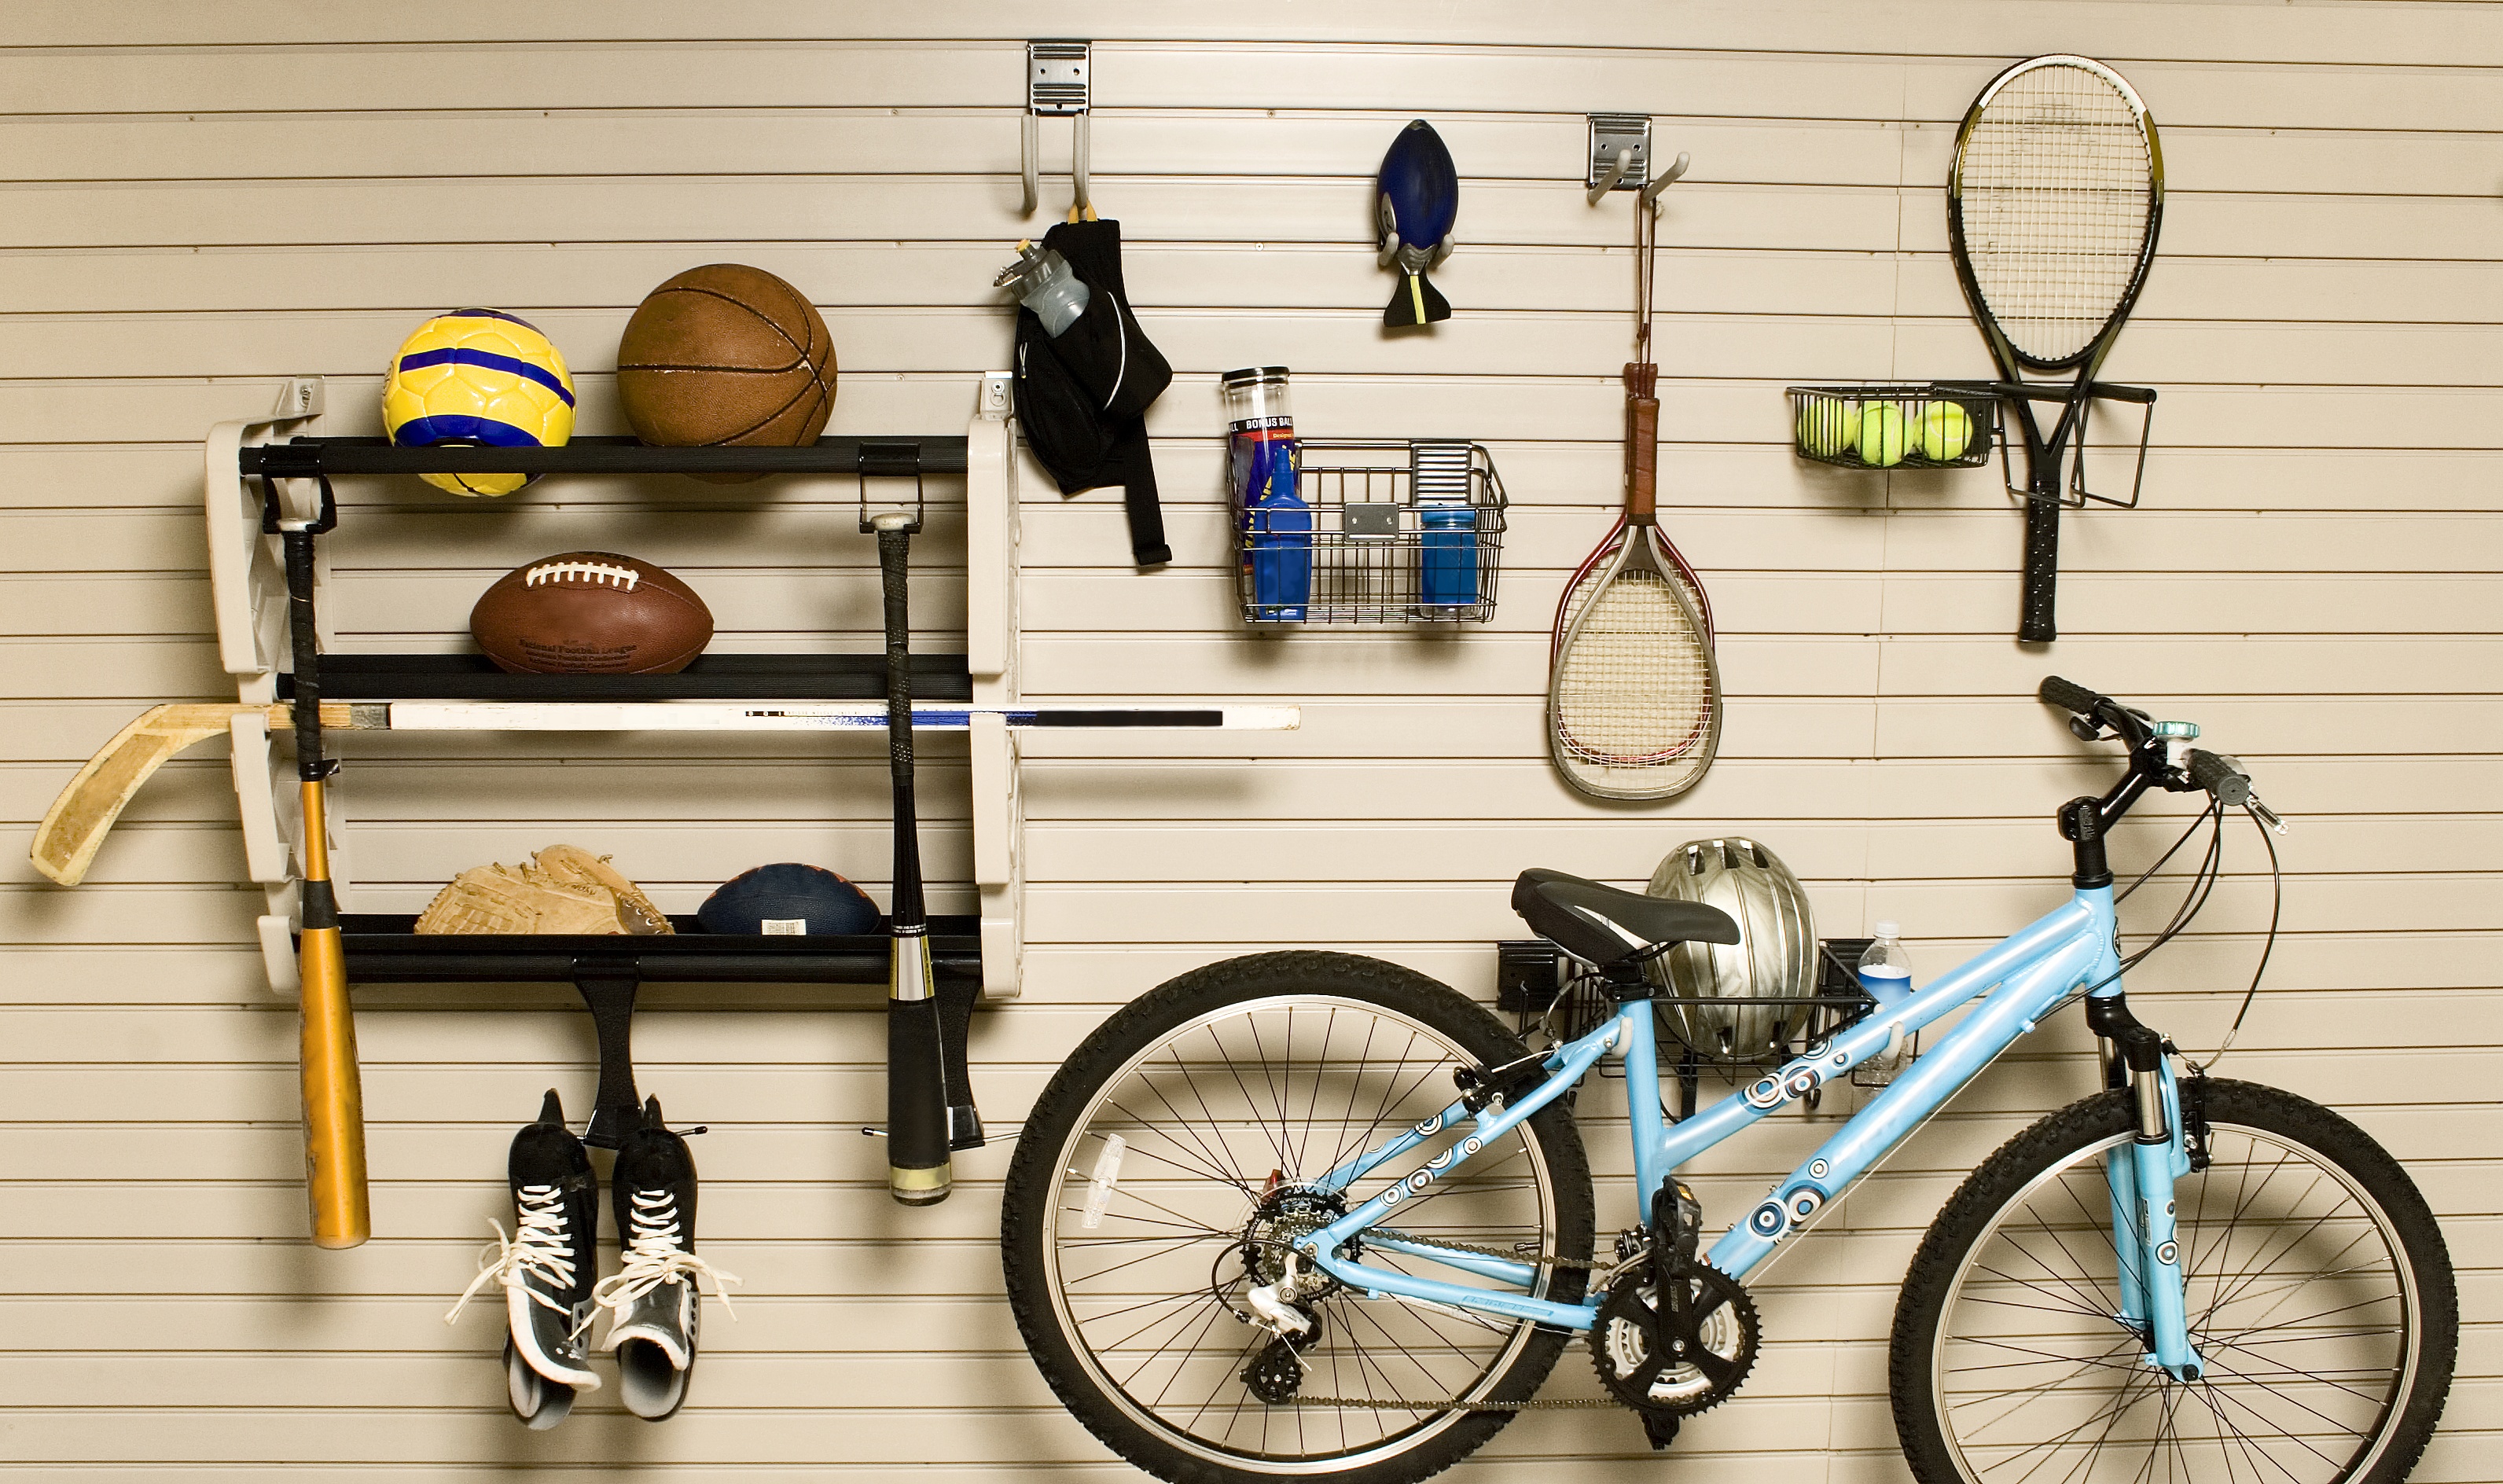 Use The Sports SlatWall Accessory Kit With SlatWall Panels To Organize Sports Equipment